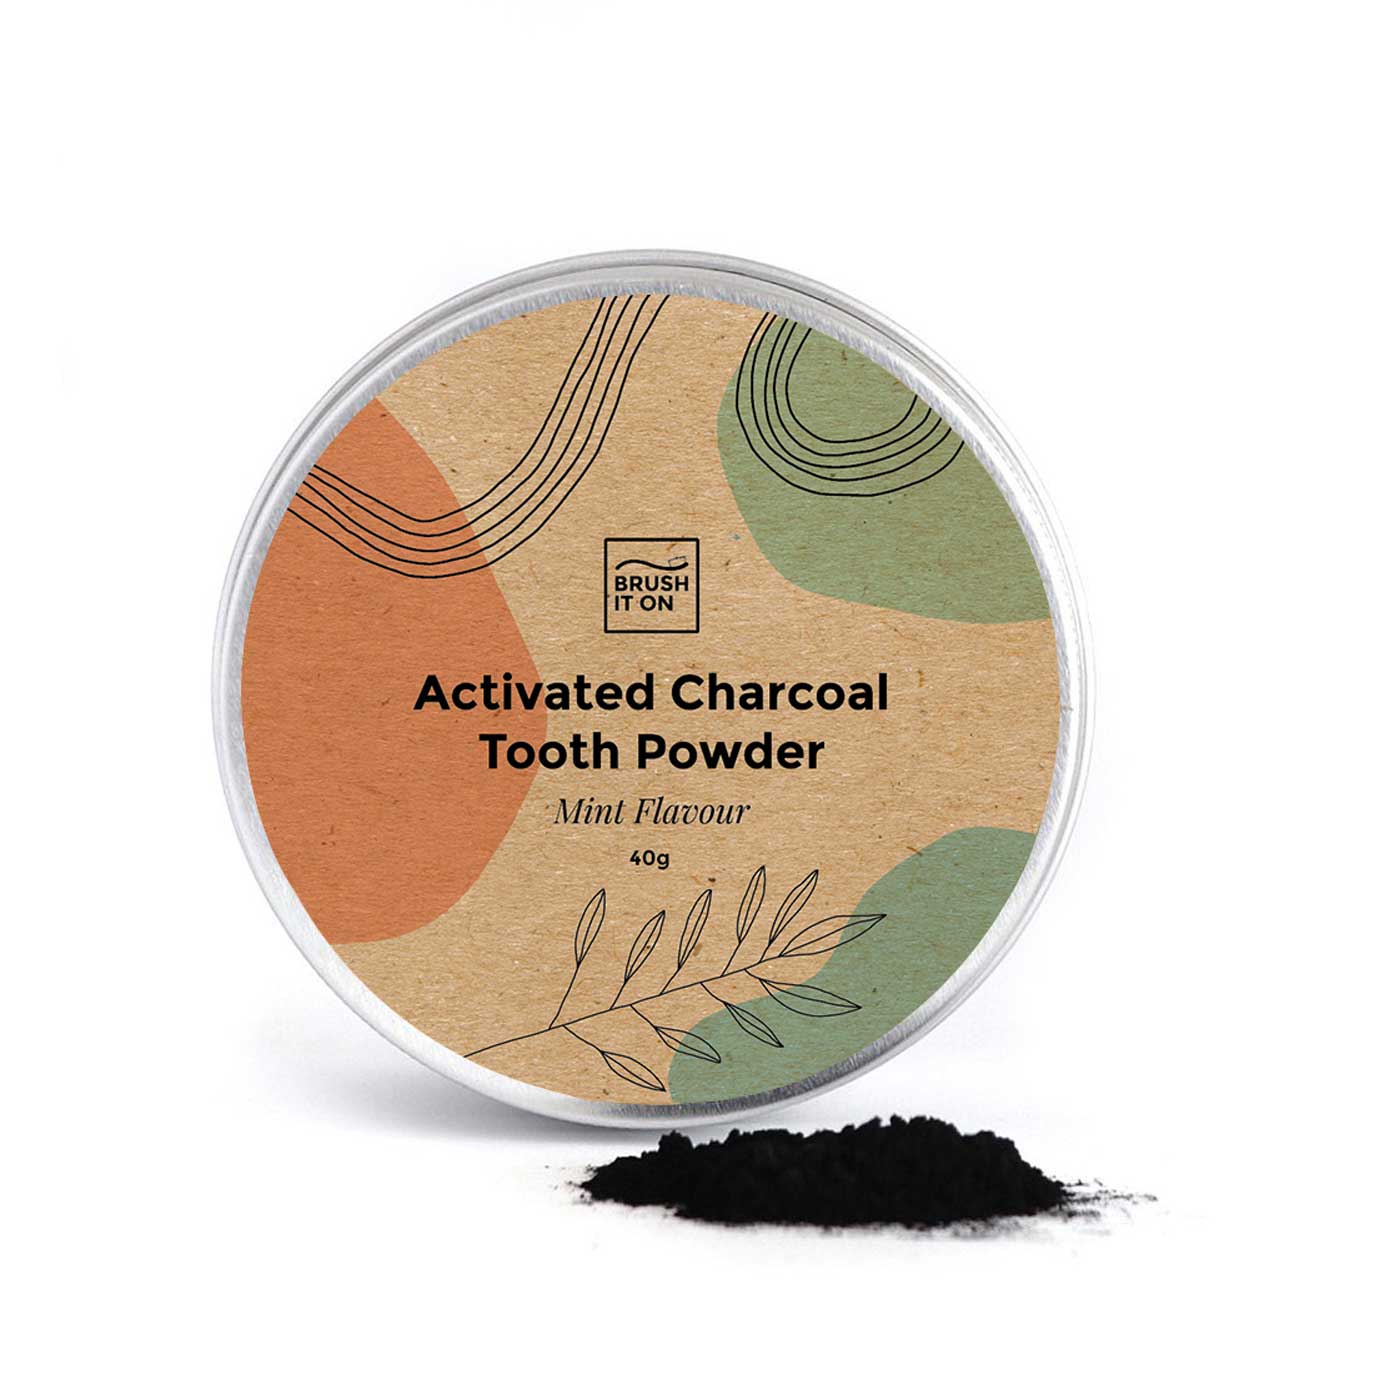 1 tub of Brush it On activated charcoal tooth powder. eco-friendly and all natural activated charcoal tooth powder.